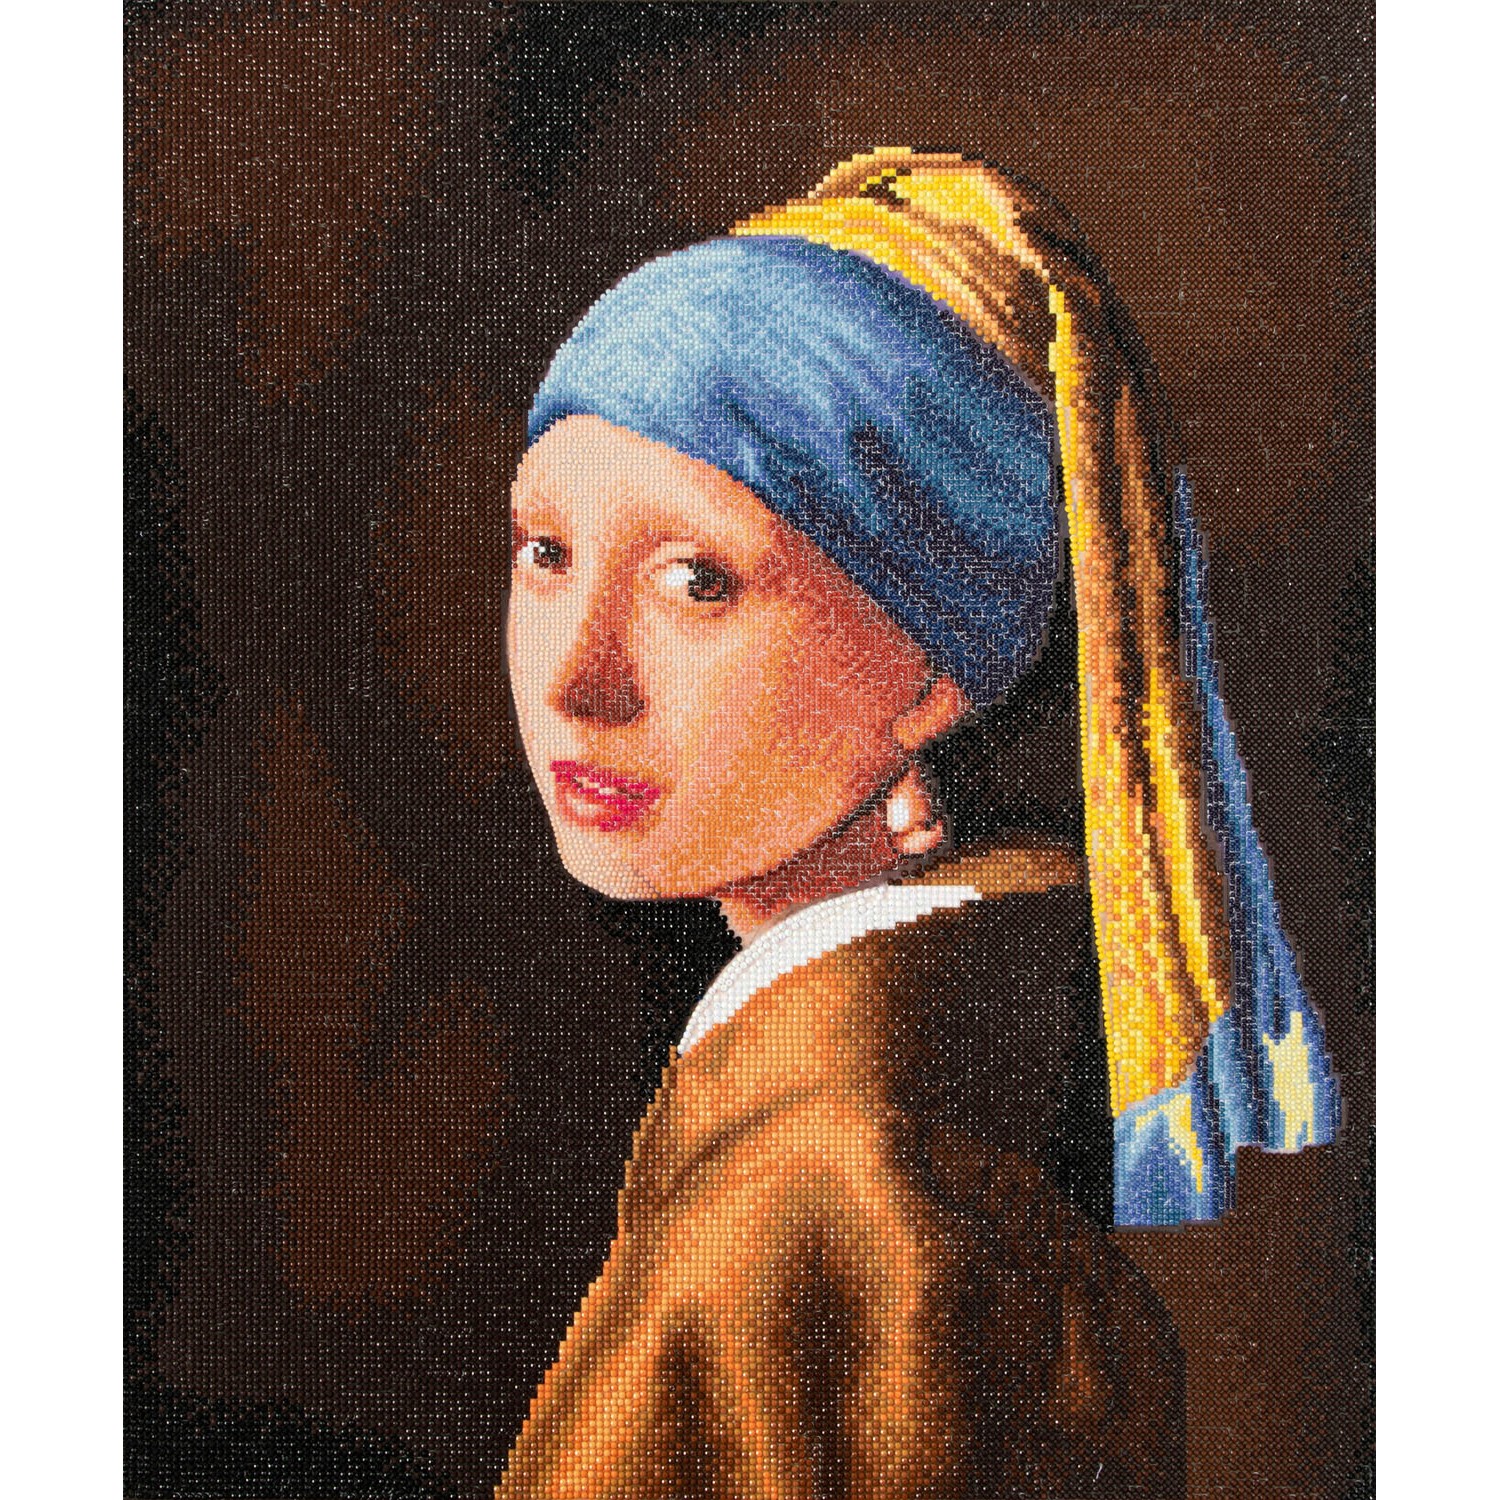 The Girl with a Pearl Earring' meets 'The Milkmaid'. Amsterdam museum set  to unite iconic works of Johannes Vermeer - The Economic Times